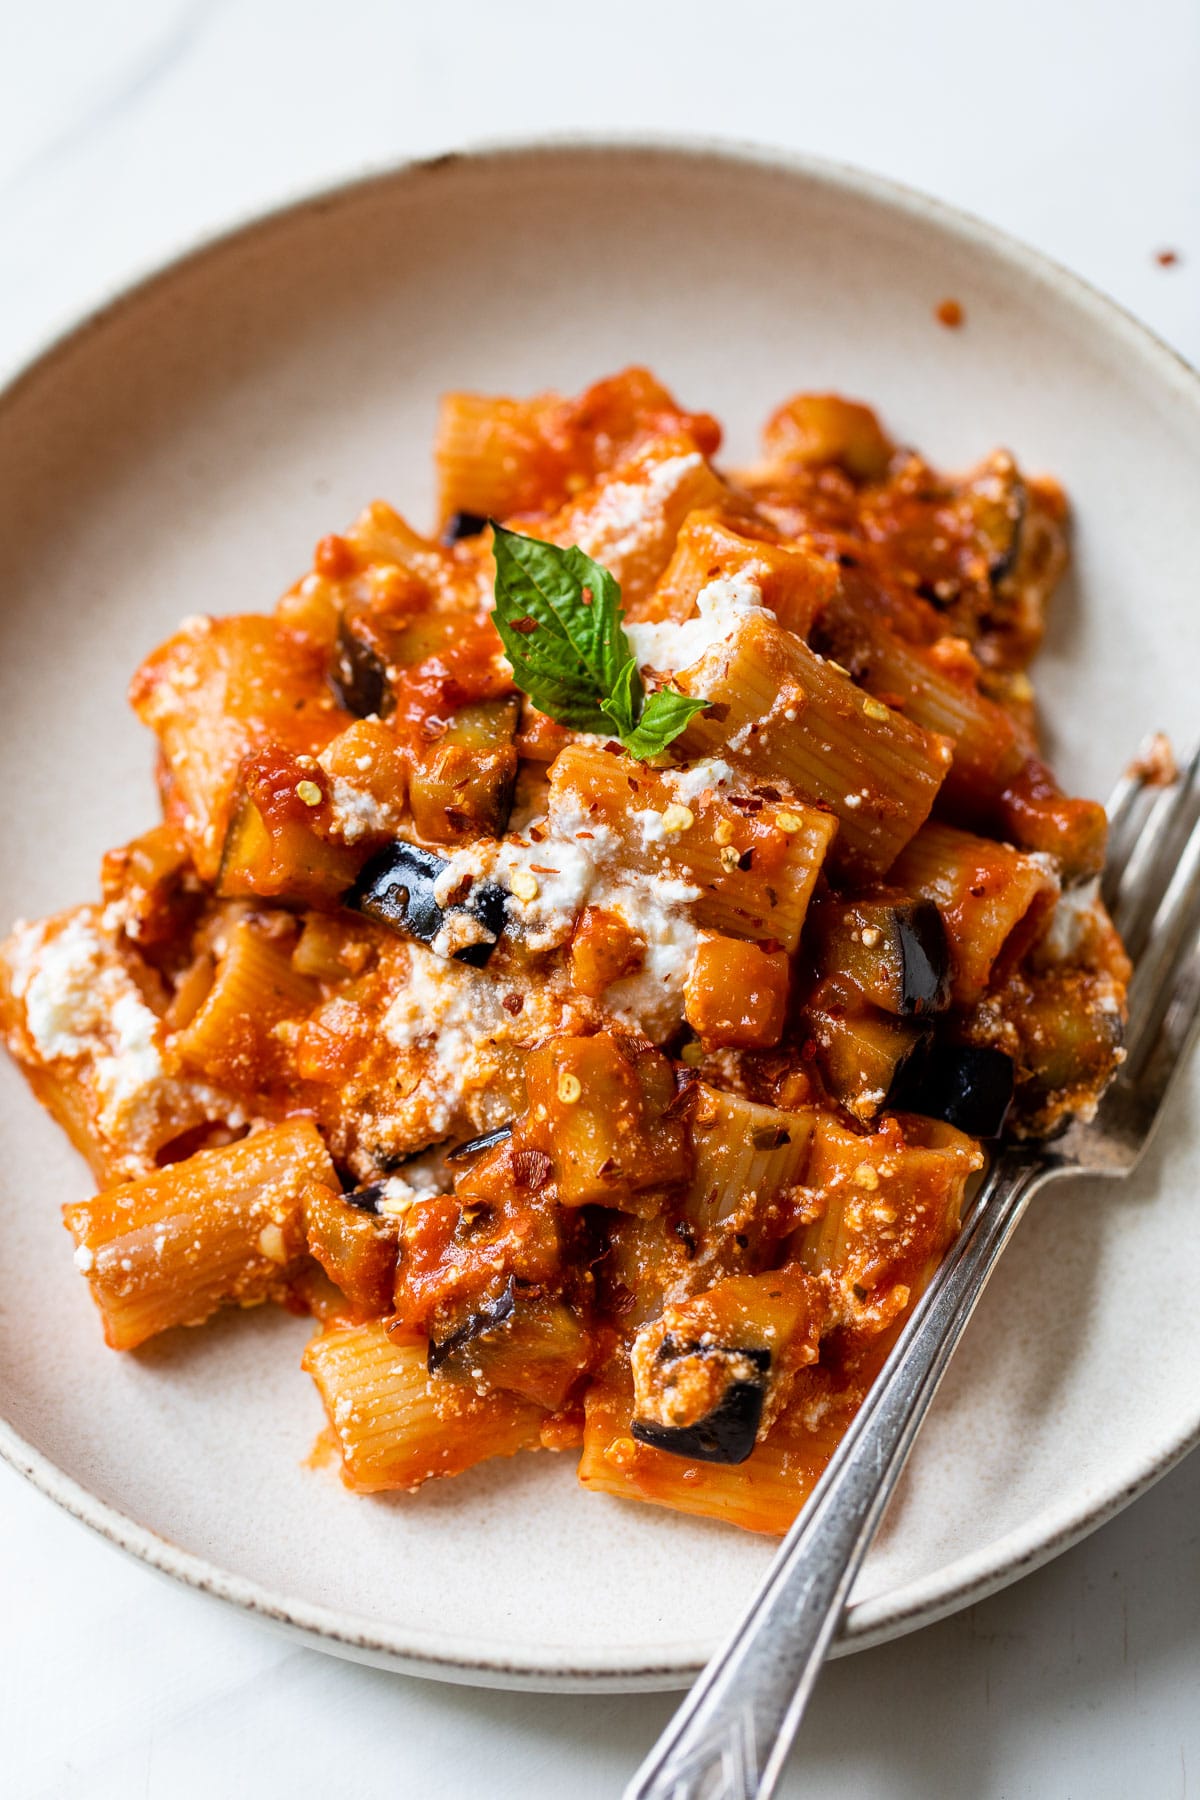 bowl filled with rigatoni pasta, cooked eggplant and topped with fresh basil